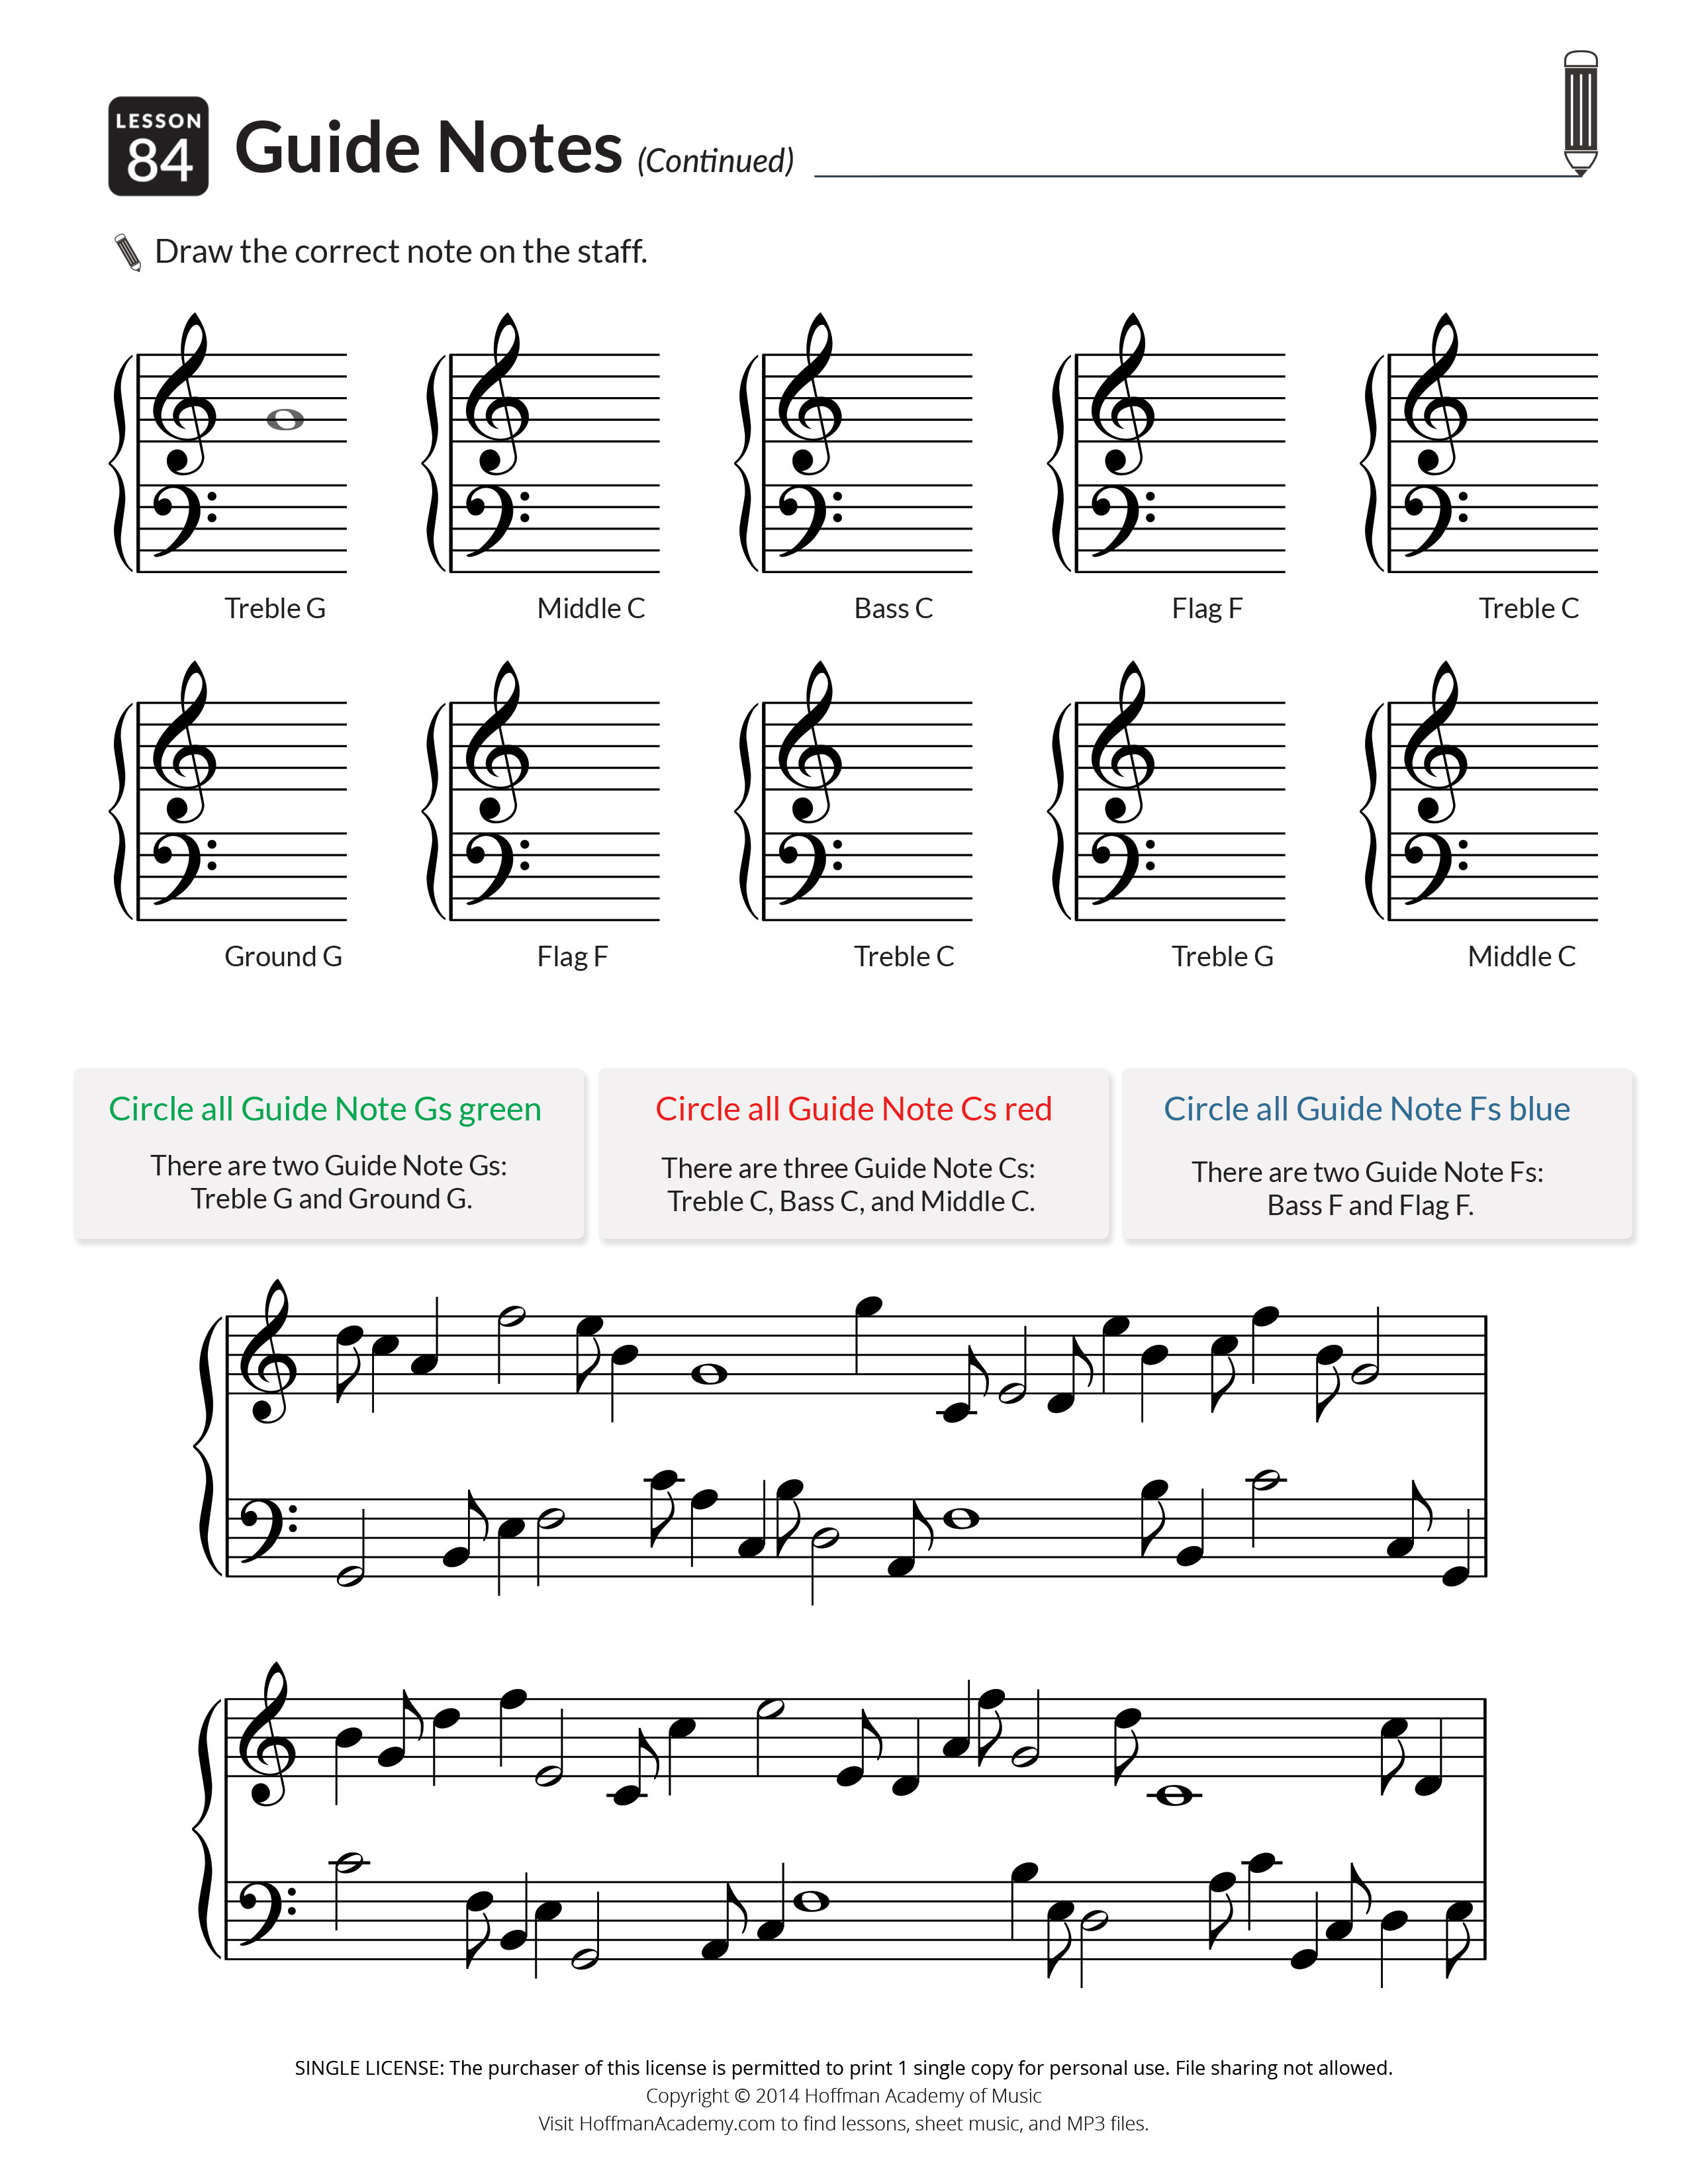 Printables &amp;amp; Audio For Piano Units 1-5: Lessons 1-100 - Hoffman Academy - Beginner Piano Worksheets Printable Free